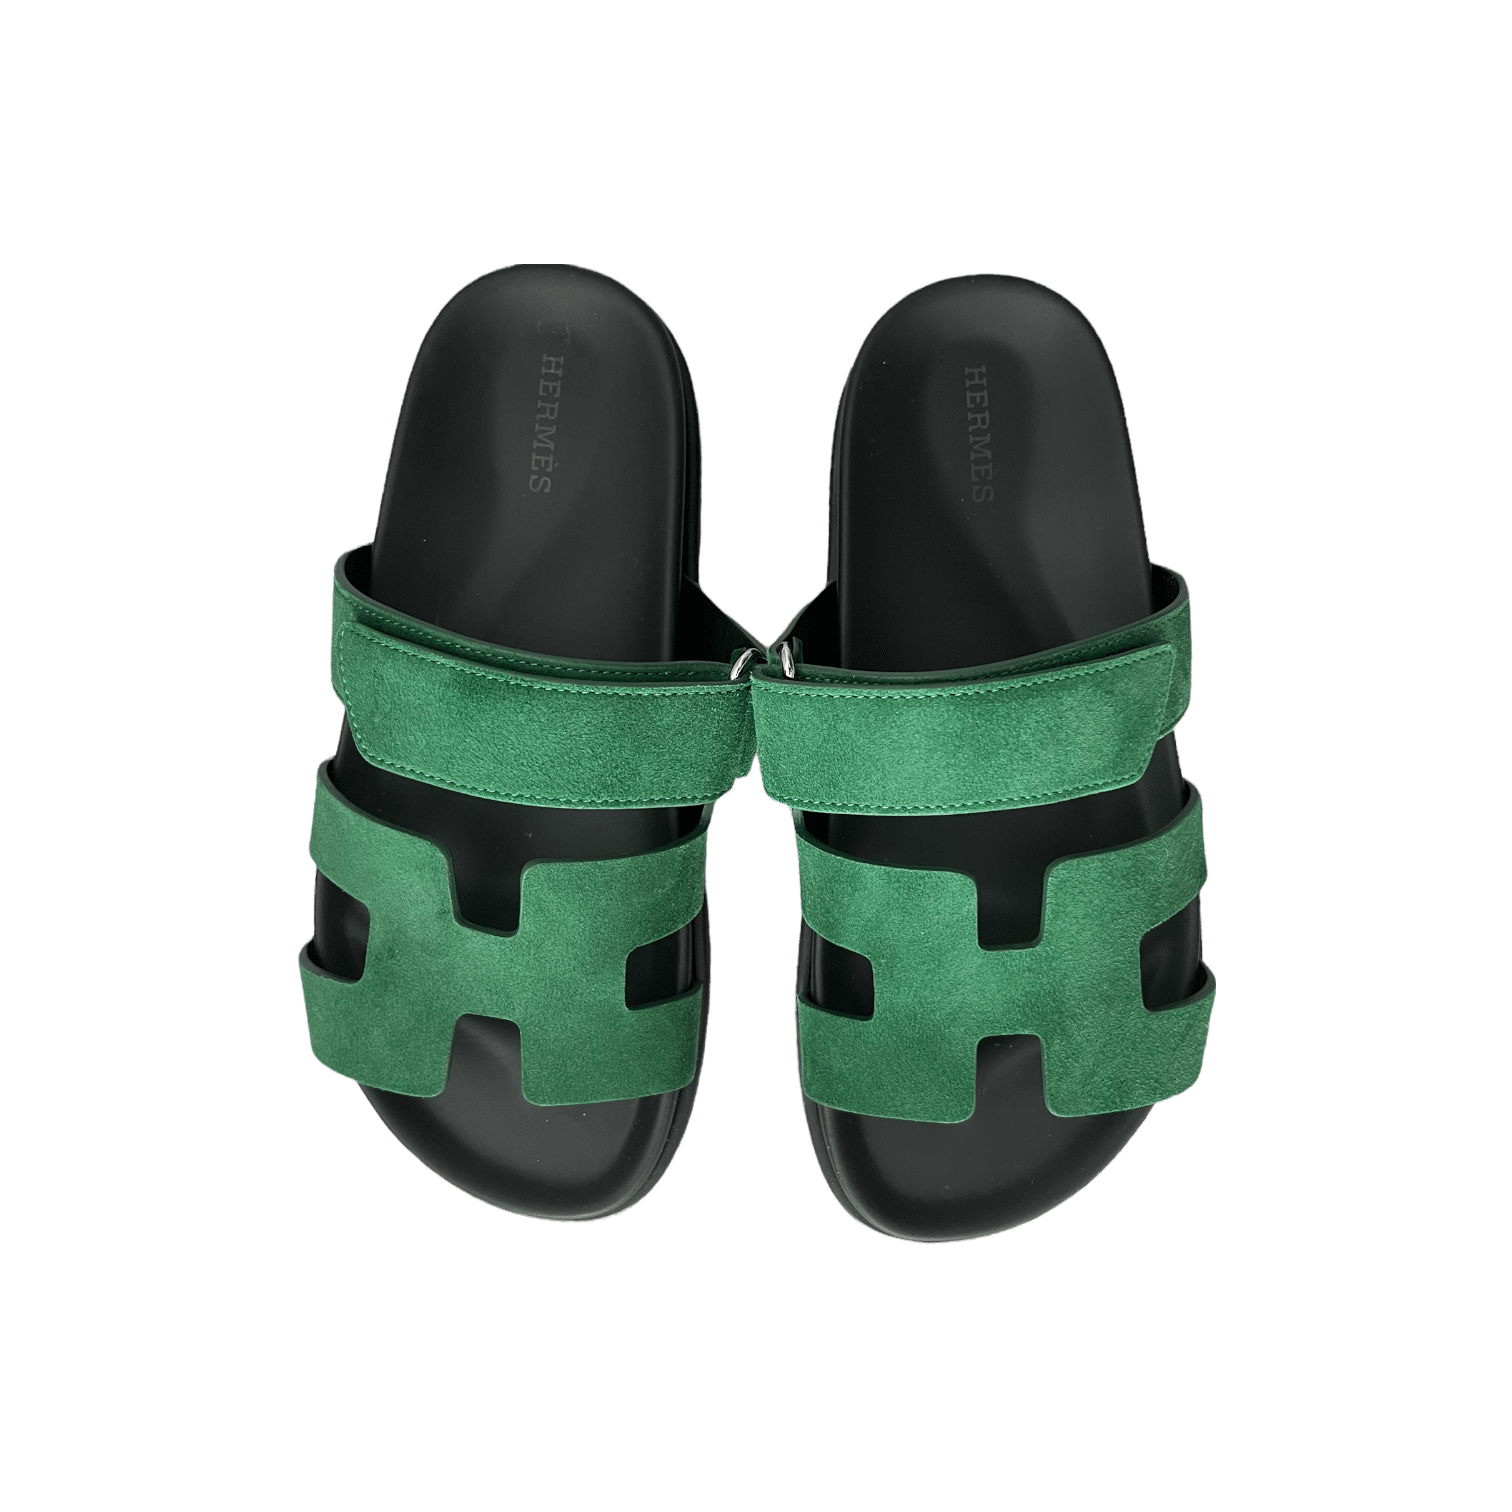 Hermes Chypre Green Sandals Size 36.5 EU - The Luxury Flavor